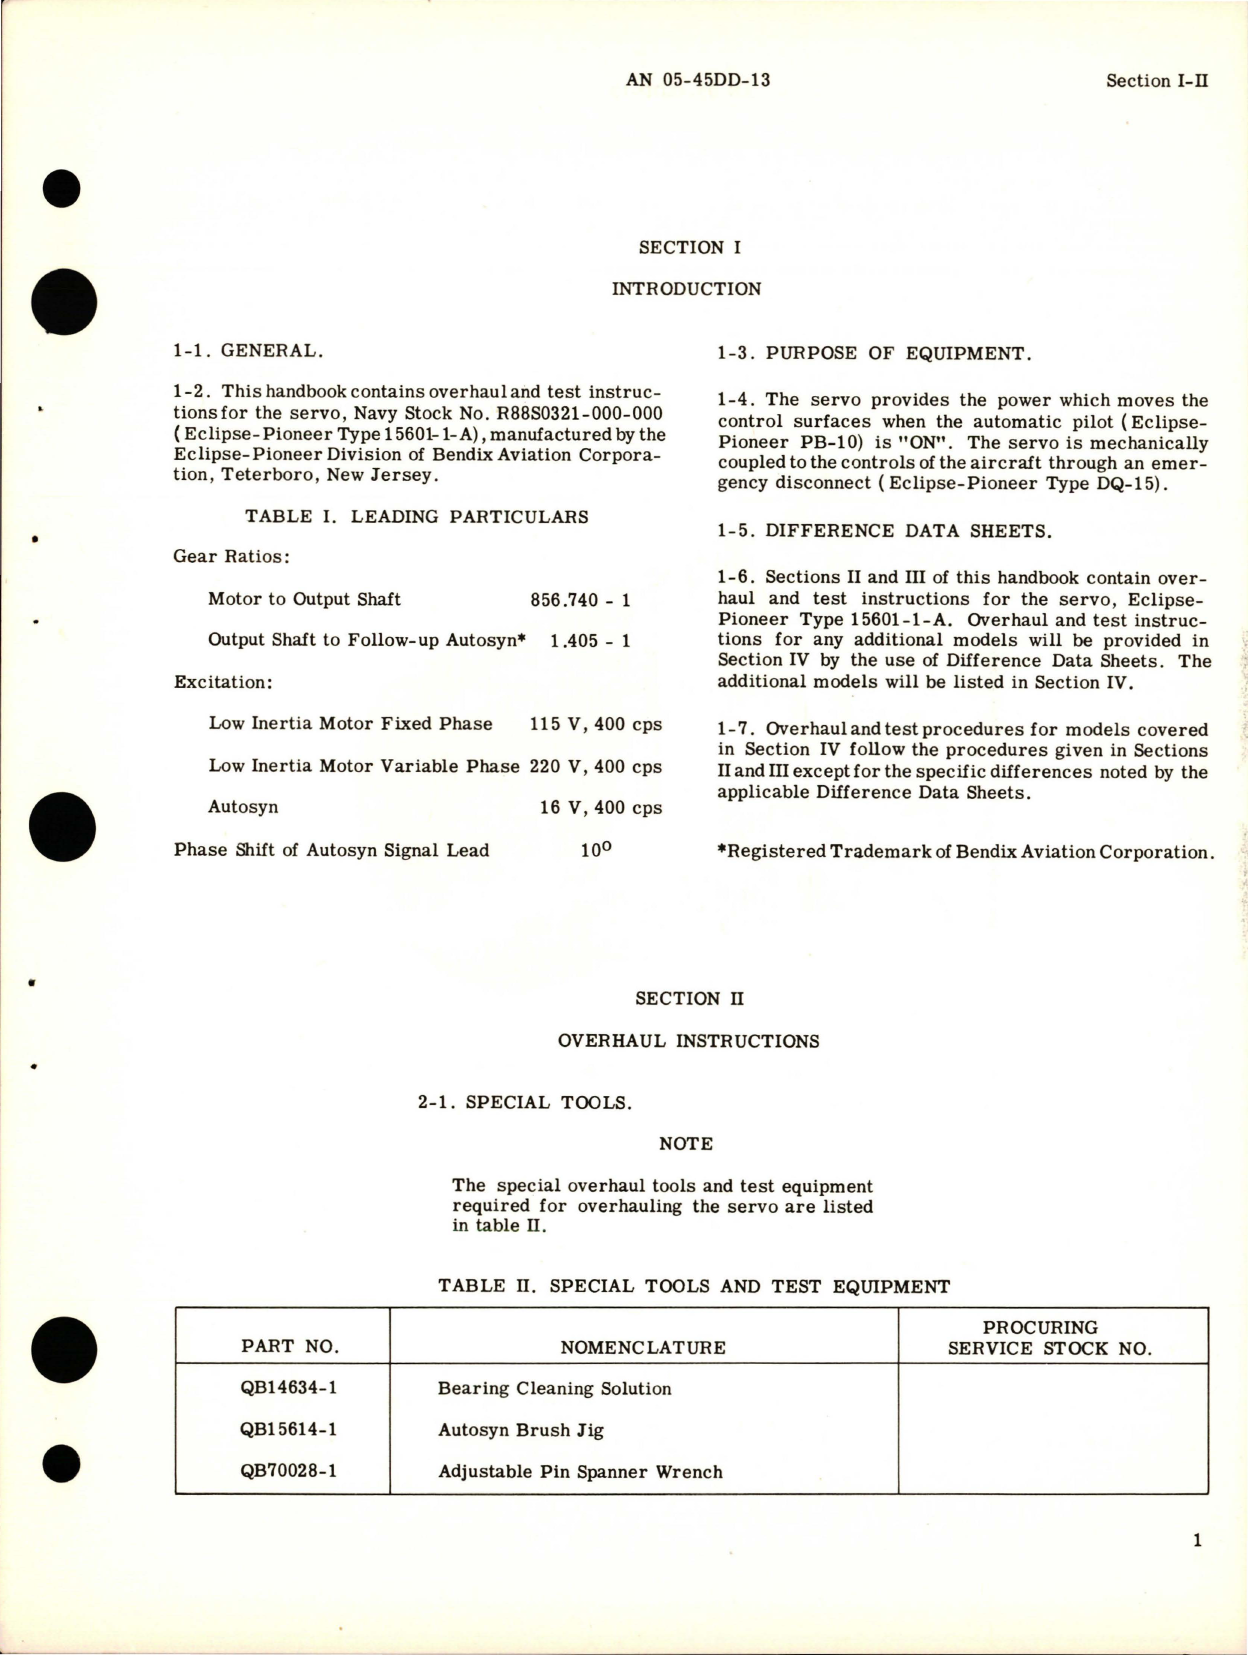 Sample page 5 from AirCorps Library document: Overhaul Instructions for Servo - Part 15601-1-A